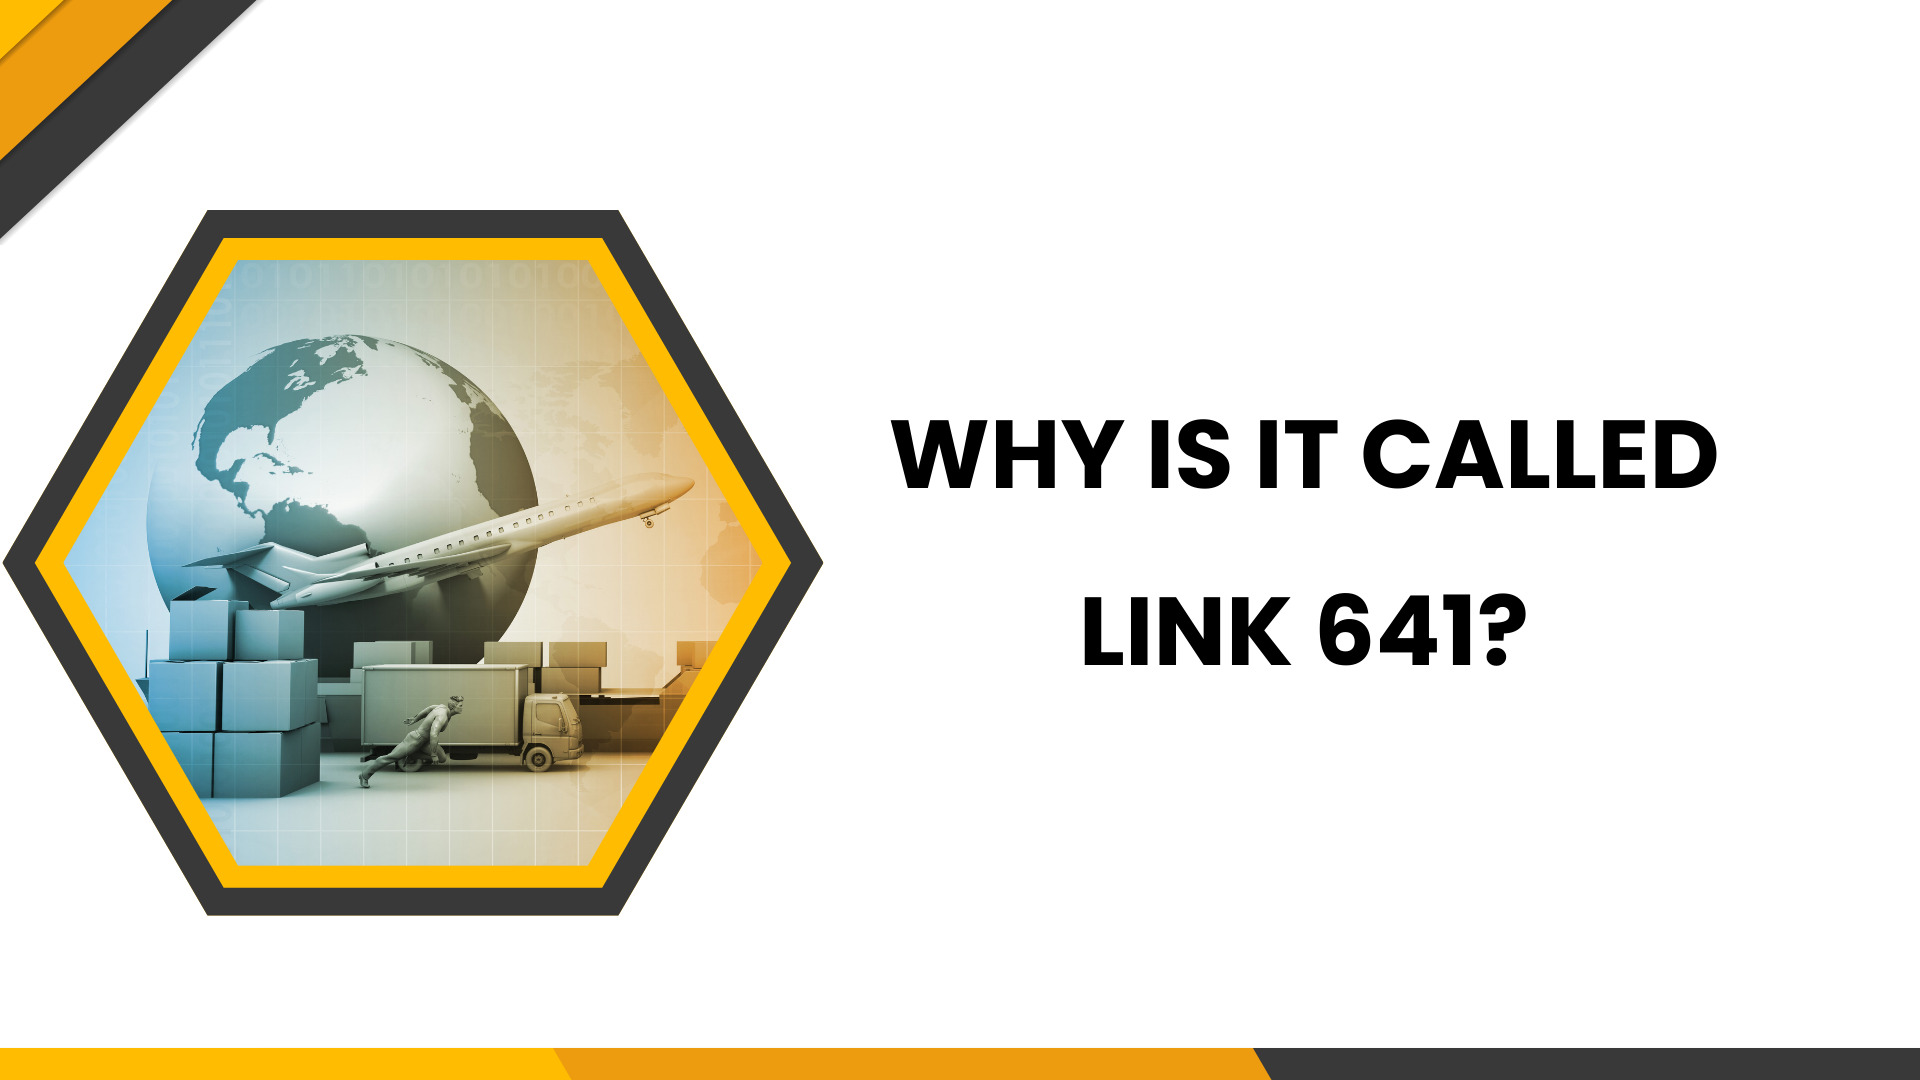 Why is it called Link 641?